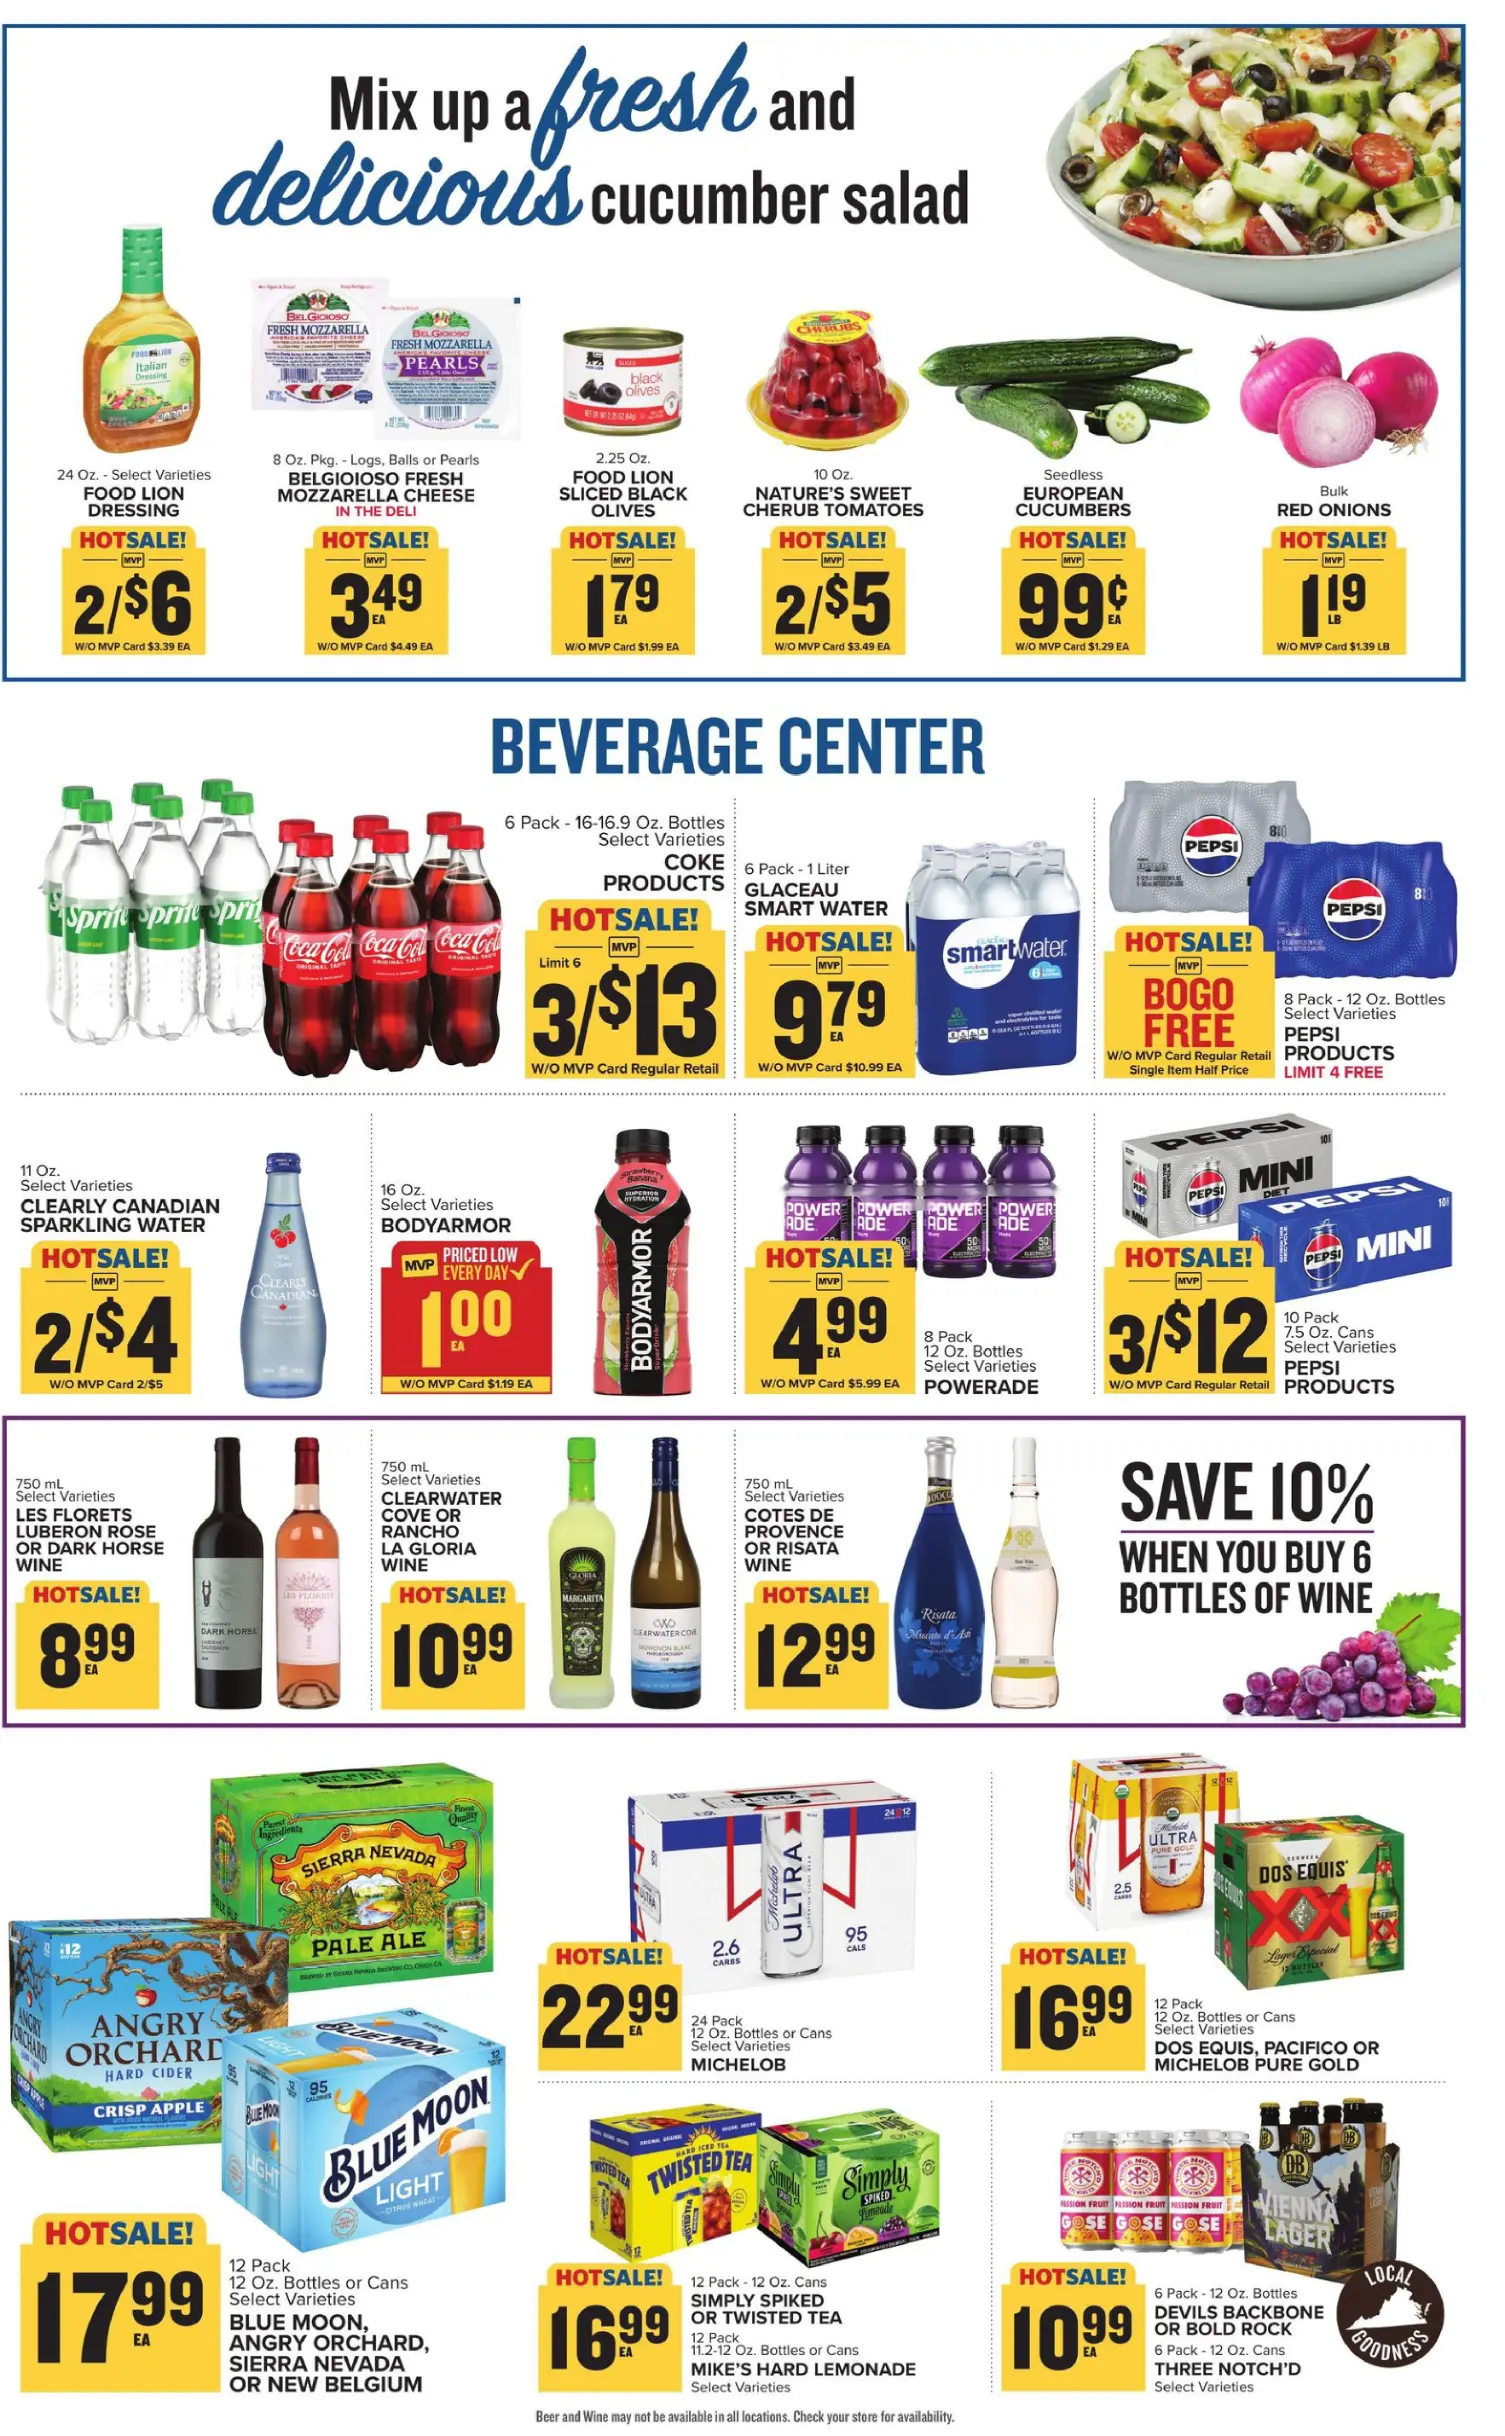 Food Lion July 2024 Weekly Sales, Deals, Discounts and Digital Coupons.